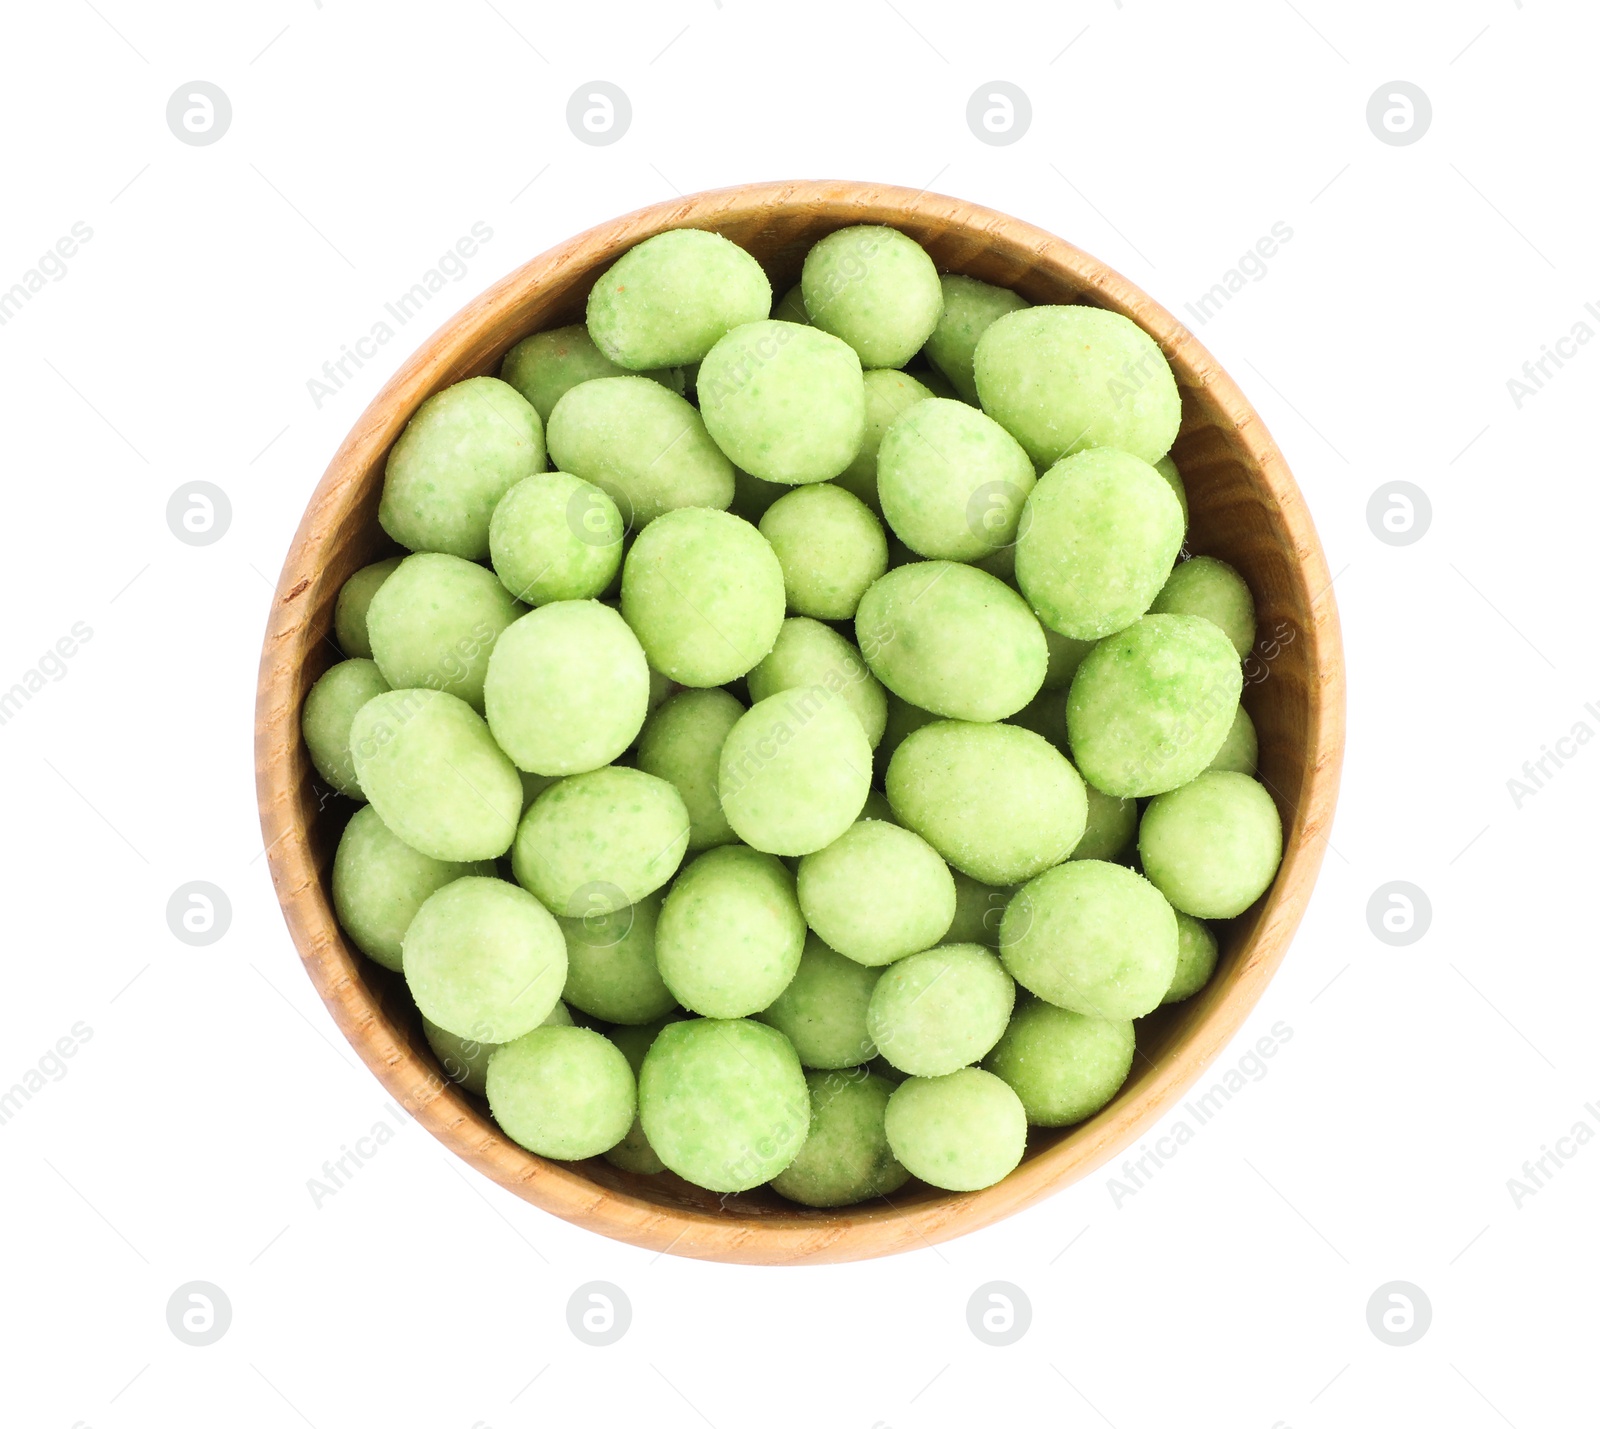 Photo of Tasty wasabi coated peanuts in wooden bowl on white background, top view